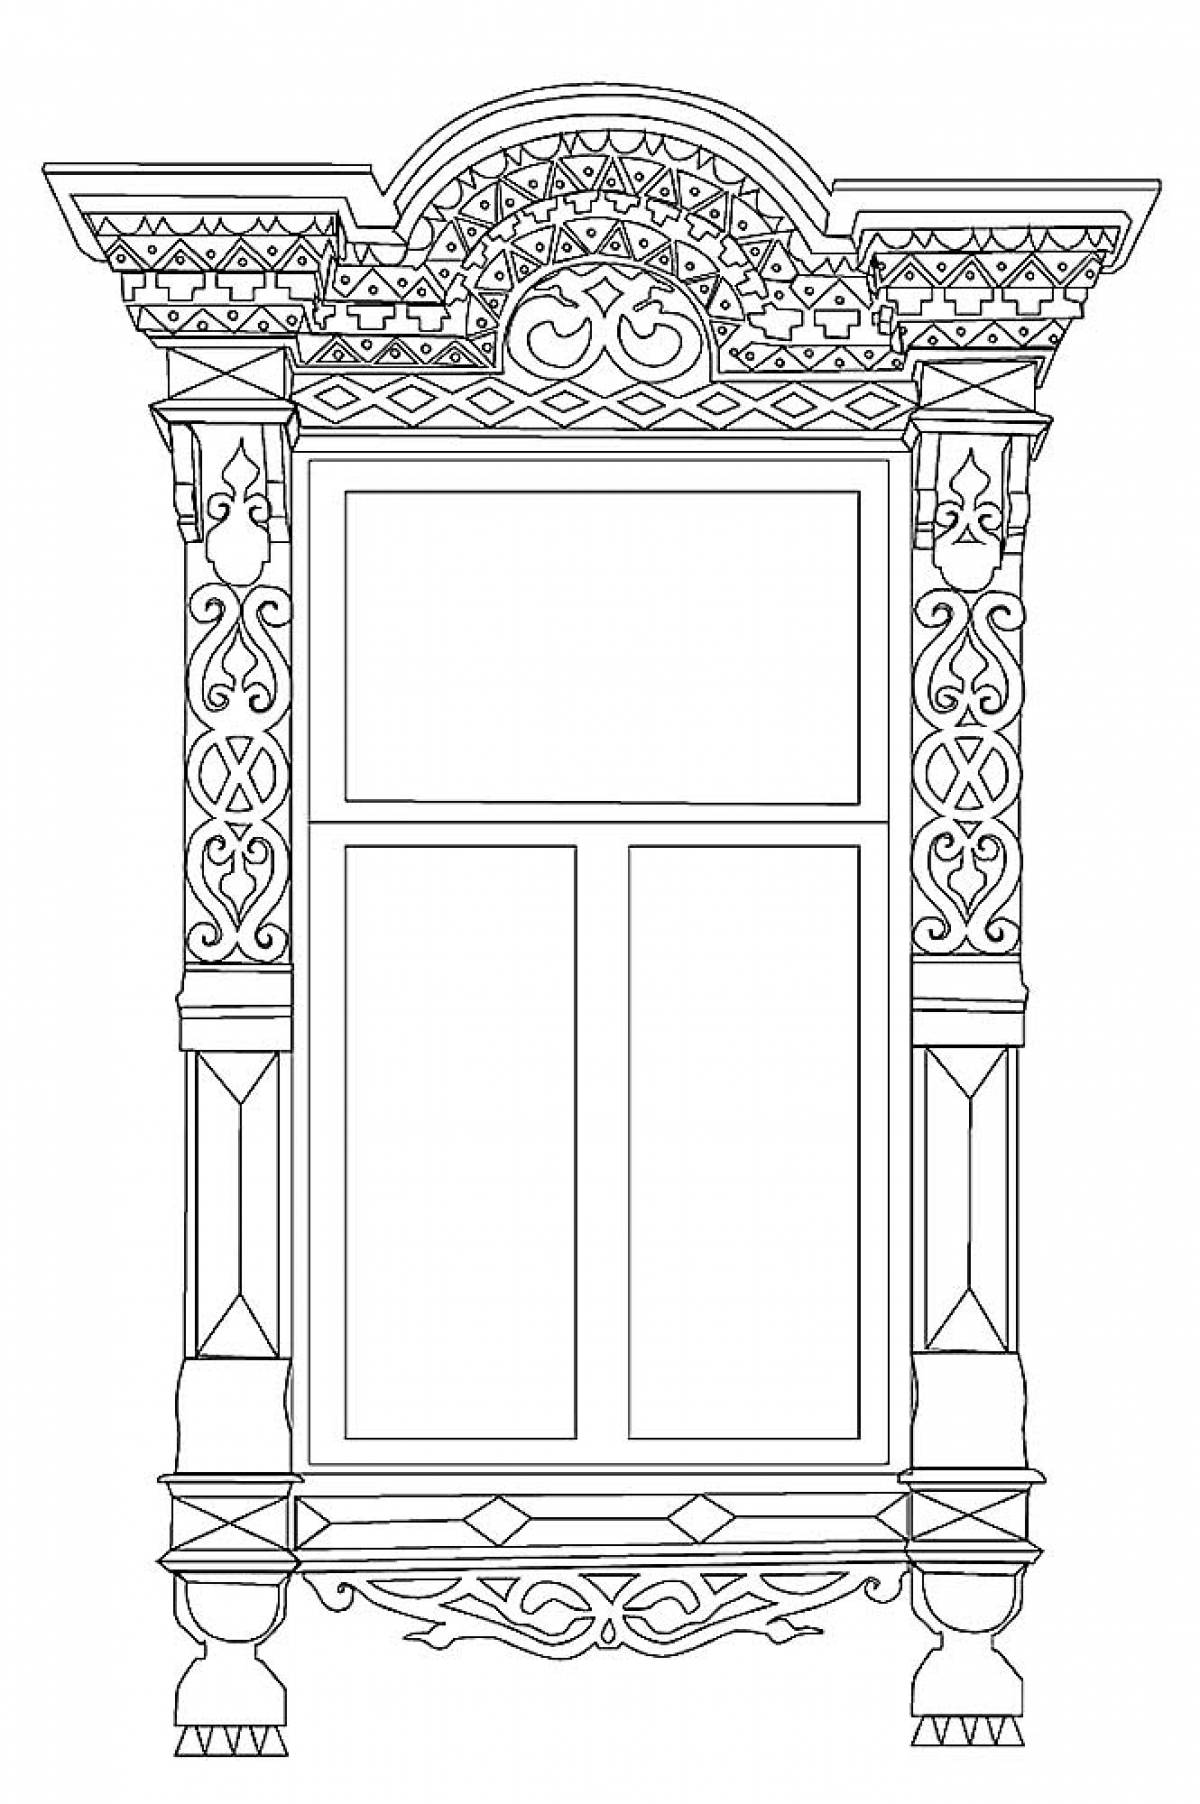 Carved window